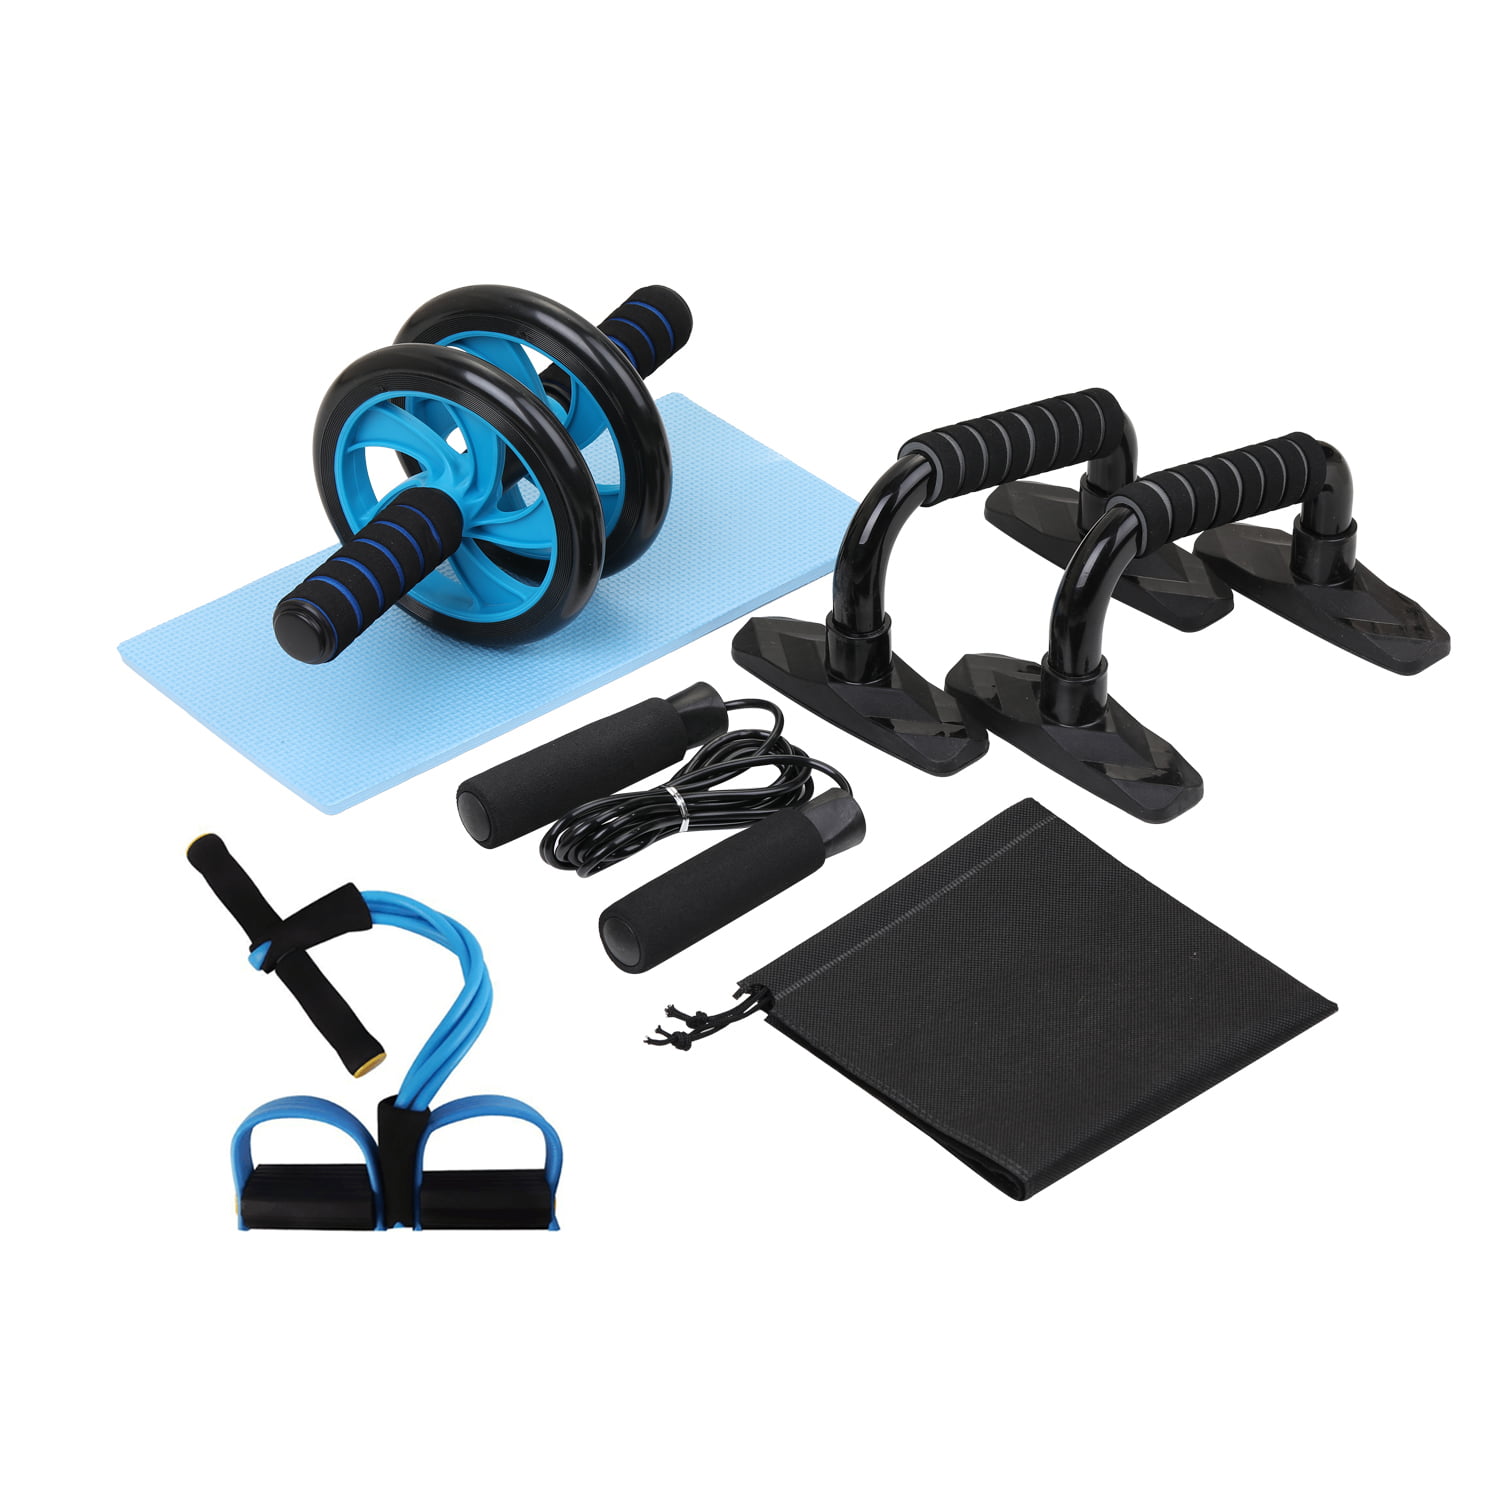 Ab Wheel Roller for Core Workout|Pushup Handles for Floor|Jump Ropes for Fitness|Resistant Band|Kneeling Pad